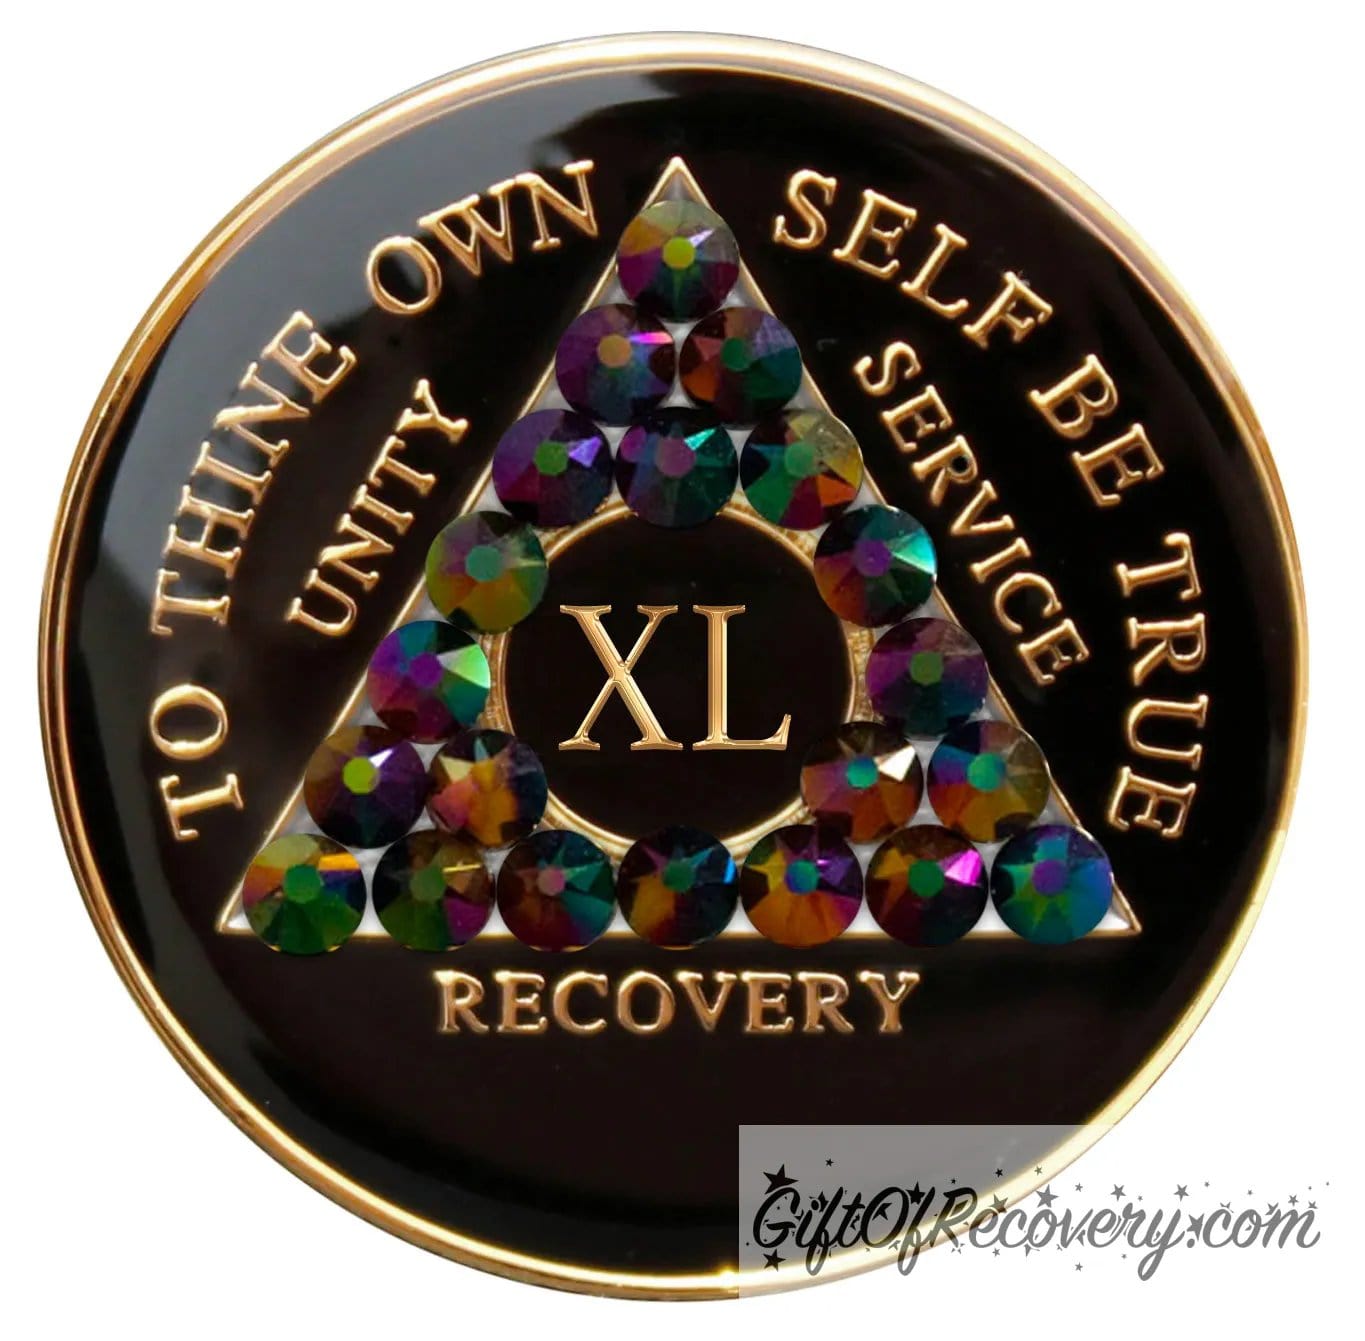 40 year black onyx AA recovery medallion, with 21 genuine peacock crystals, symbolizing the beauty and diversity of recovery journeys, the AA medallion has; to thine own self be true, unity, service, recovery, roman numeral, and the rim, embossed with 14k gold and sealed with resin for a glossy finish.